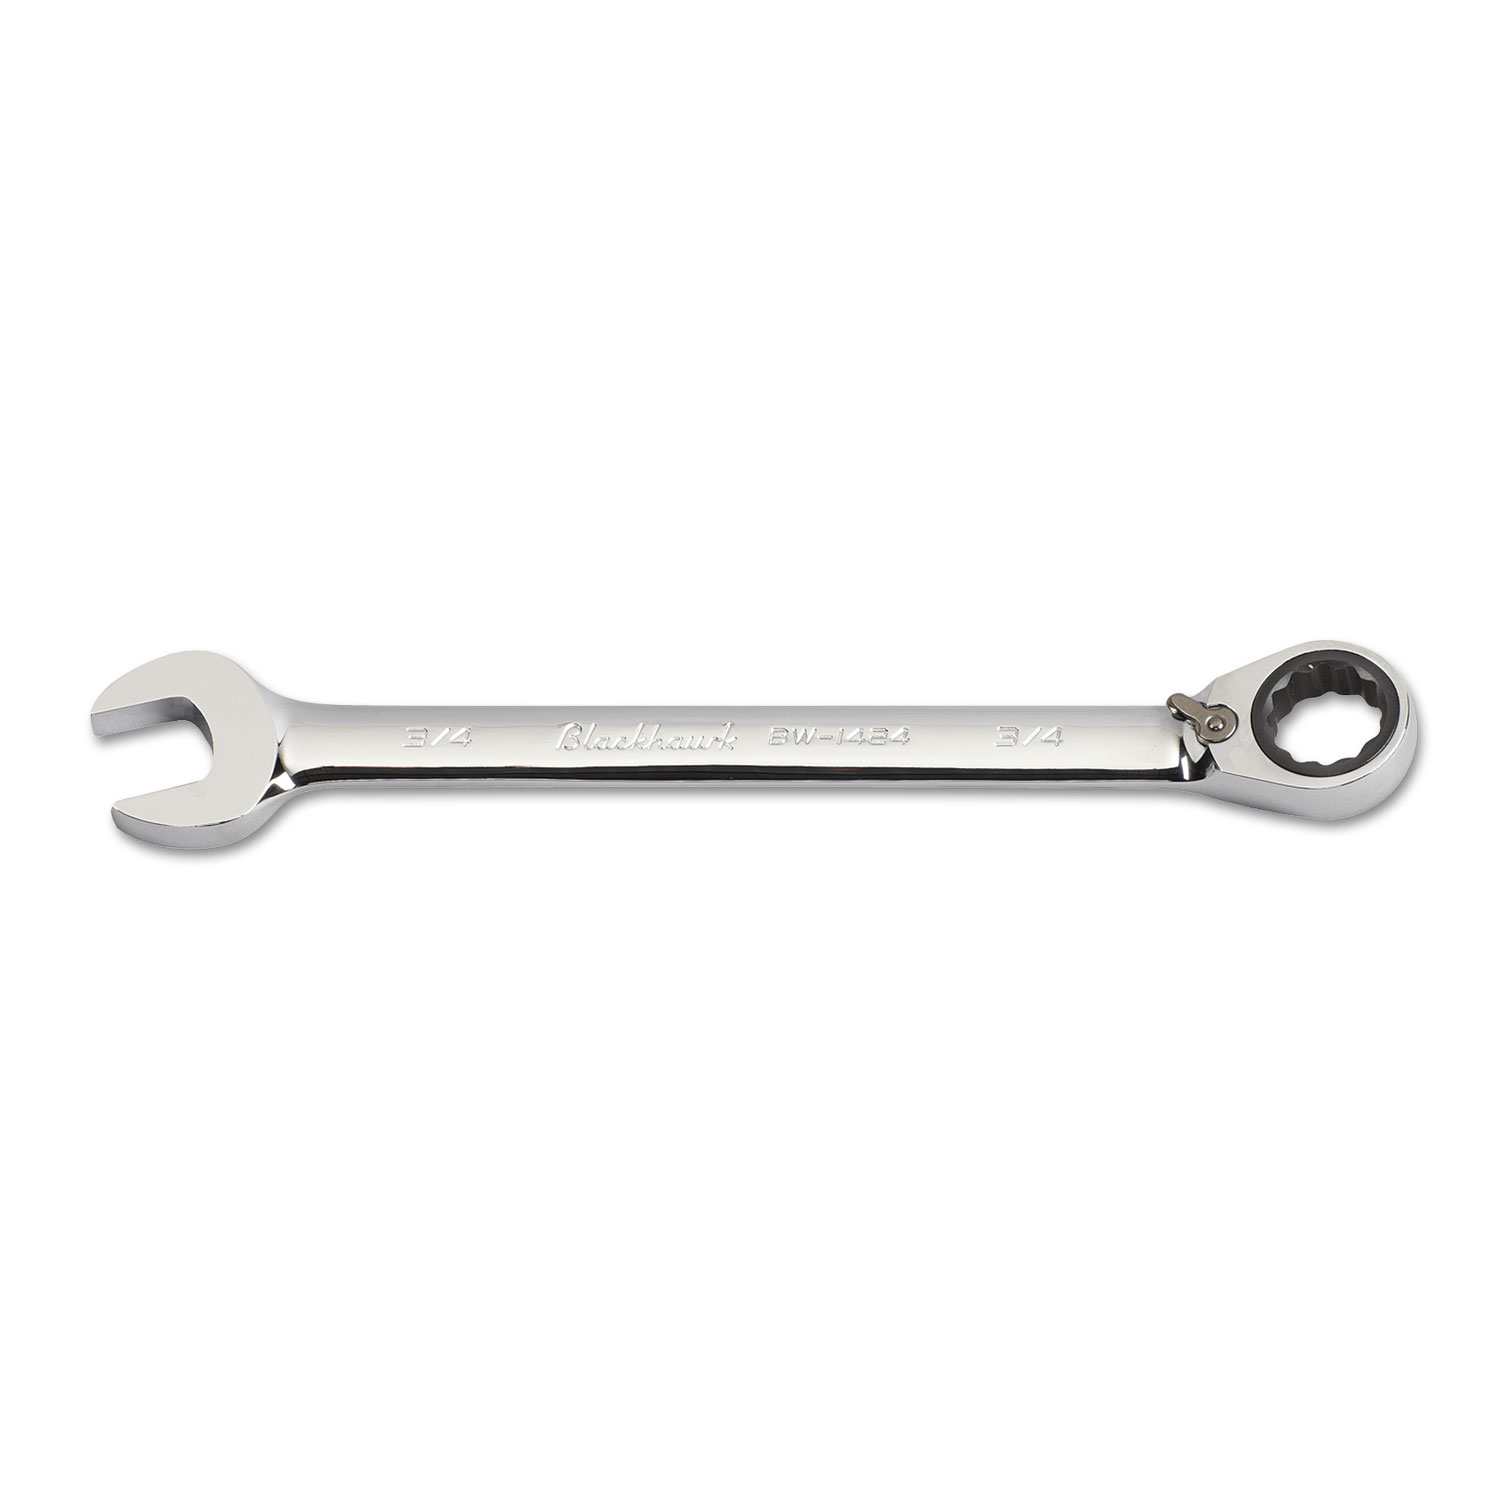 Reversible Ratcheting Box Wrench, 3/4 Long